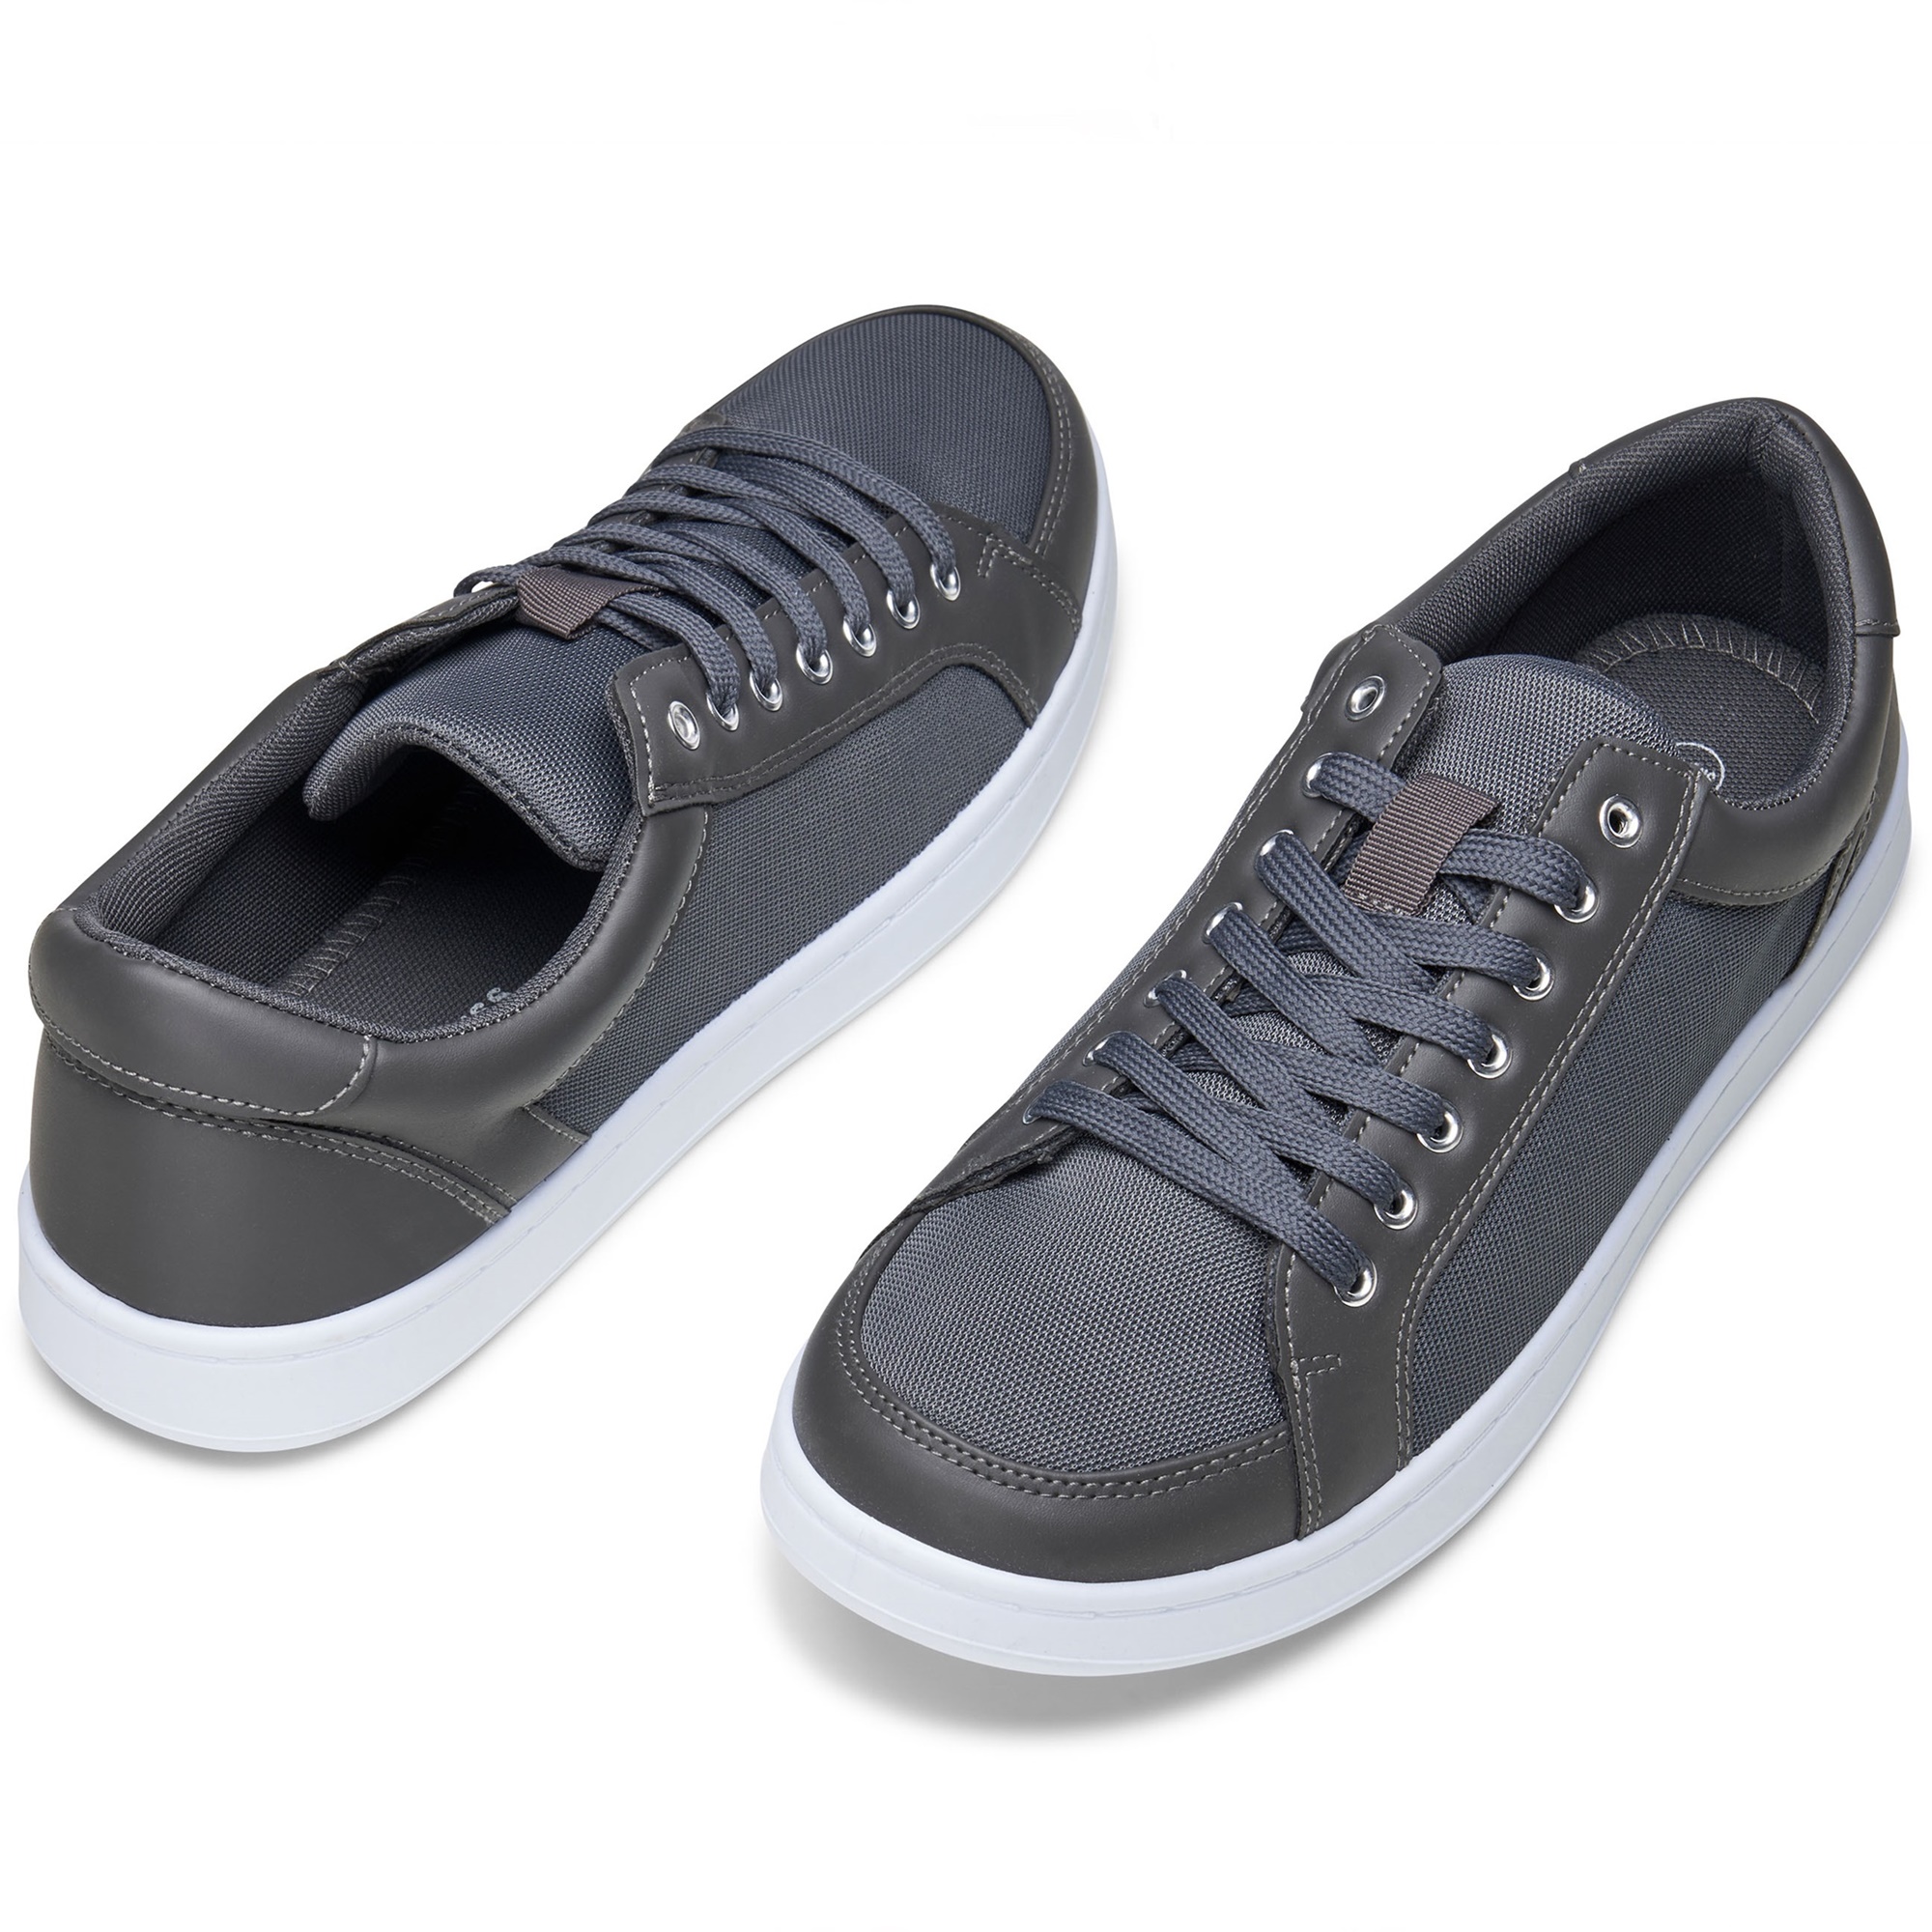 Alpine Swiss David Mens Fashion Sneakers Lace Up Low Top Retro Tennis Shoes - image 3 of 6